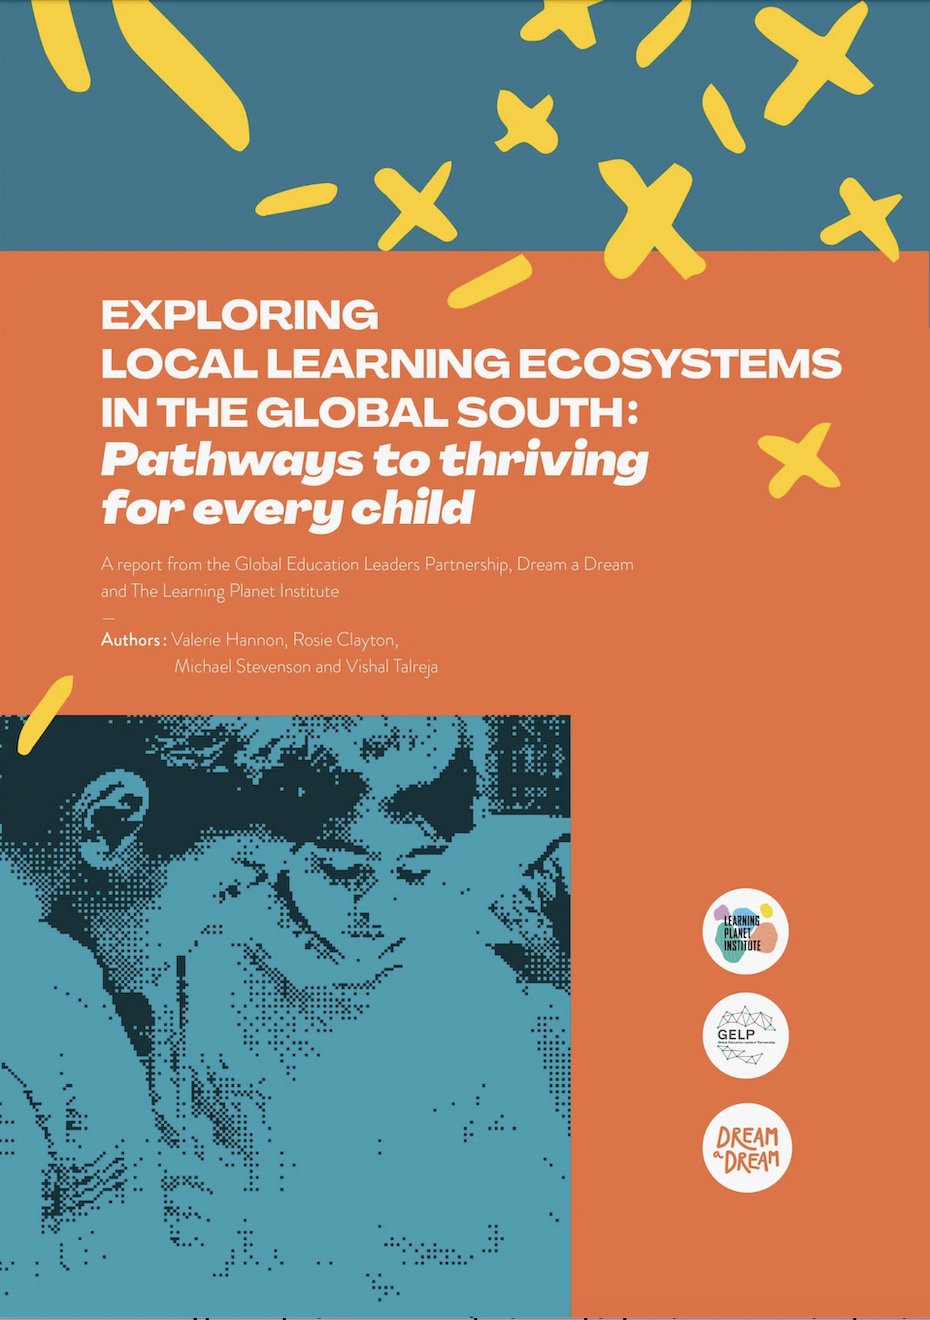 The LearningPlanet Assembly, June edition, covered the launch of the Exploring Local Learning Ecosystems in the Global South report.